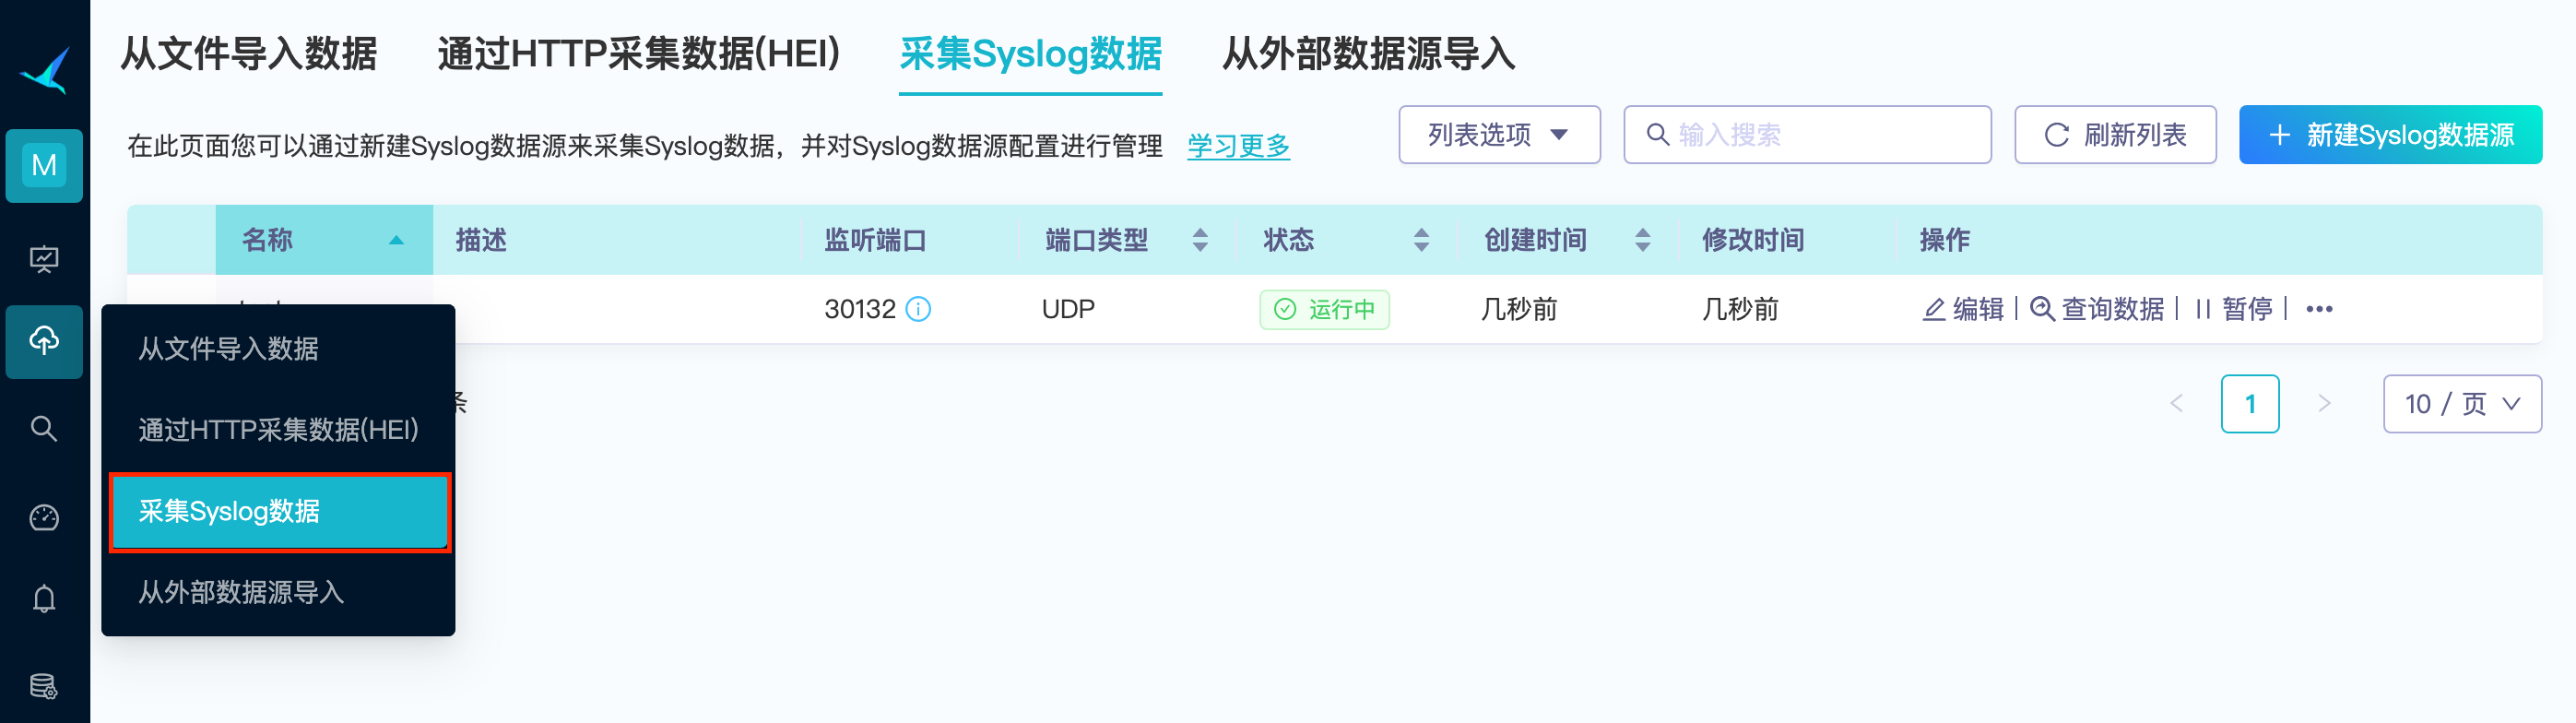 syslog_page